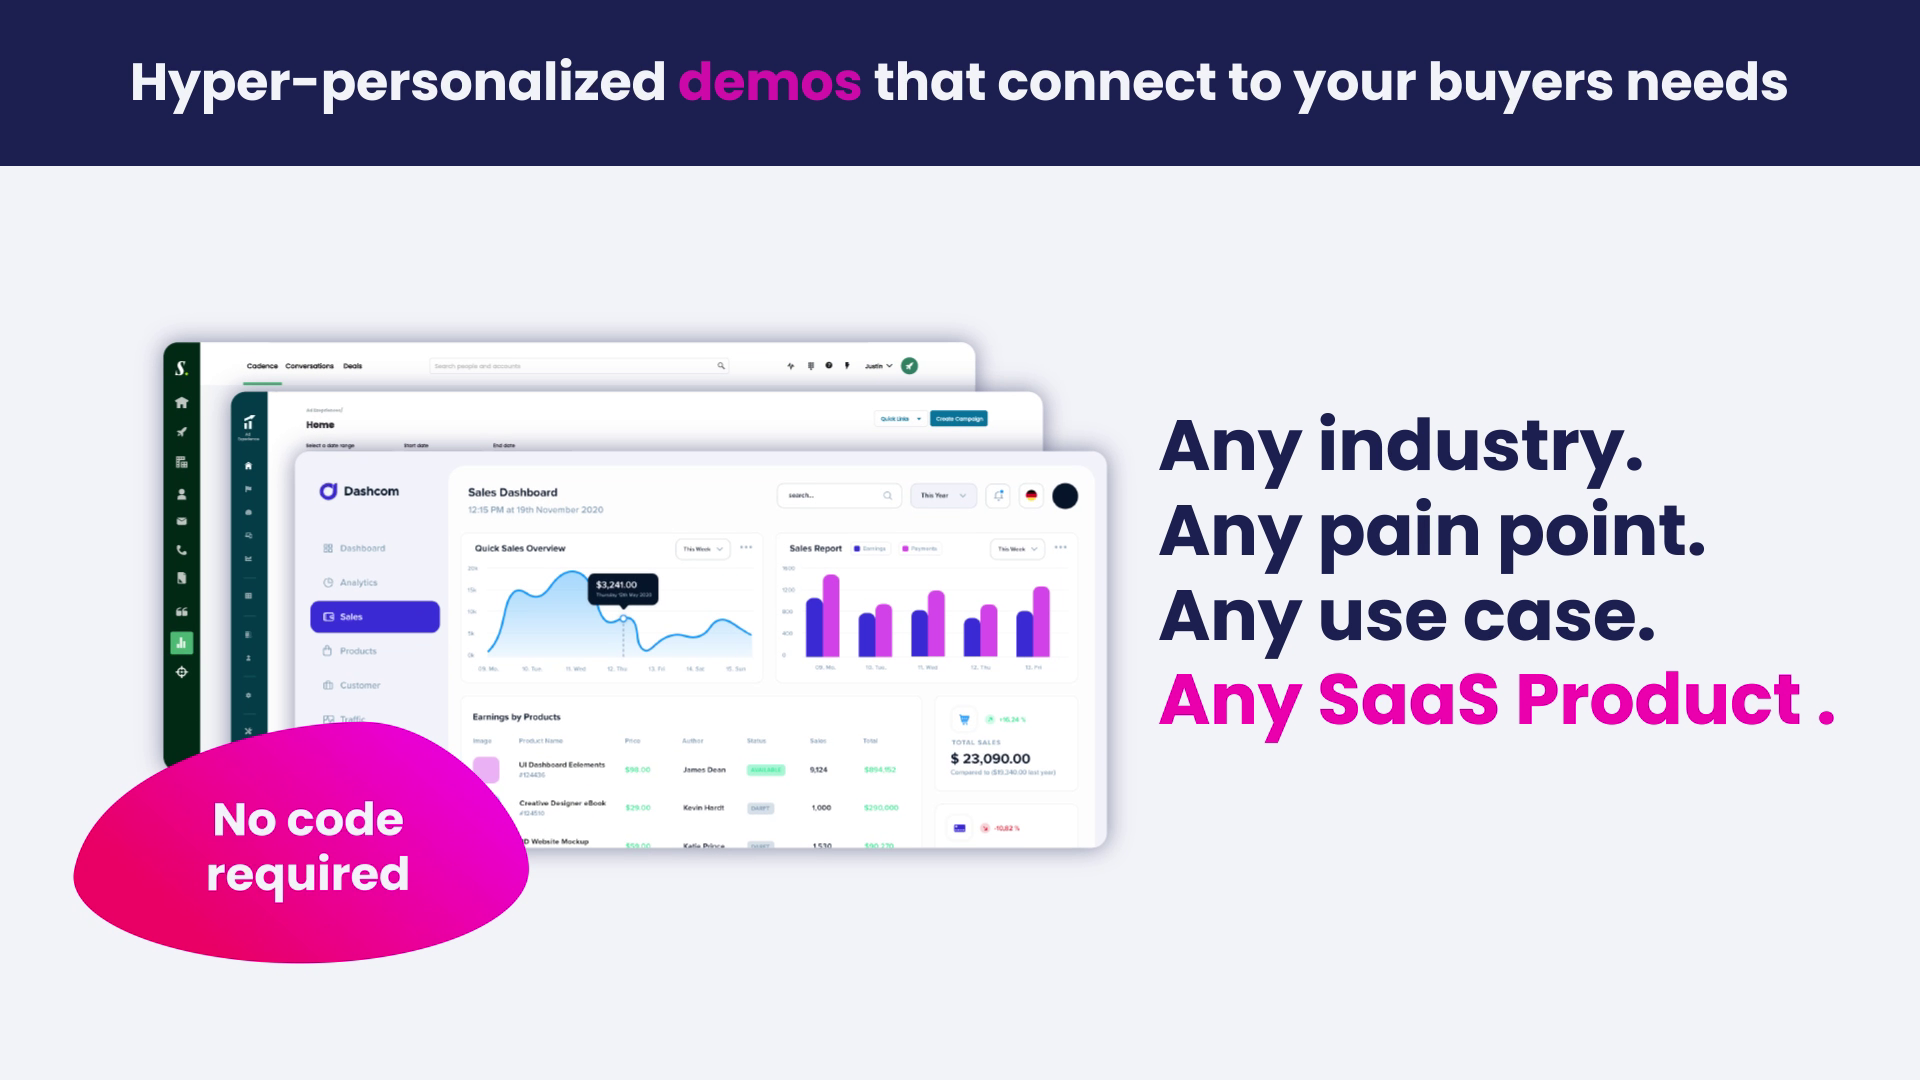 Saleo Live allows you to personalize your live demo environment with data to support any industry, pain point, or use case.